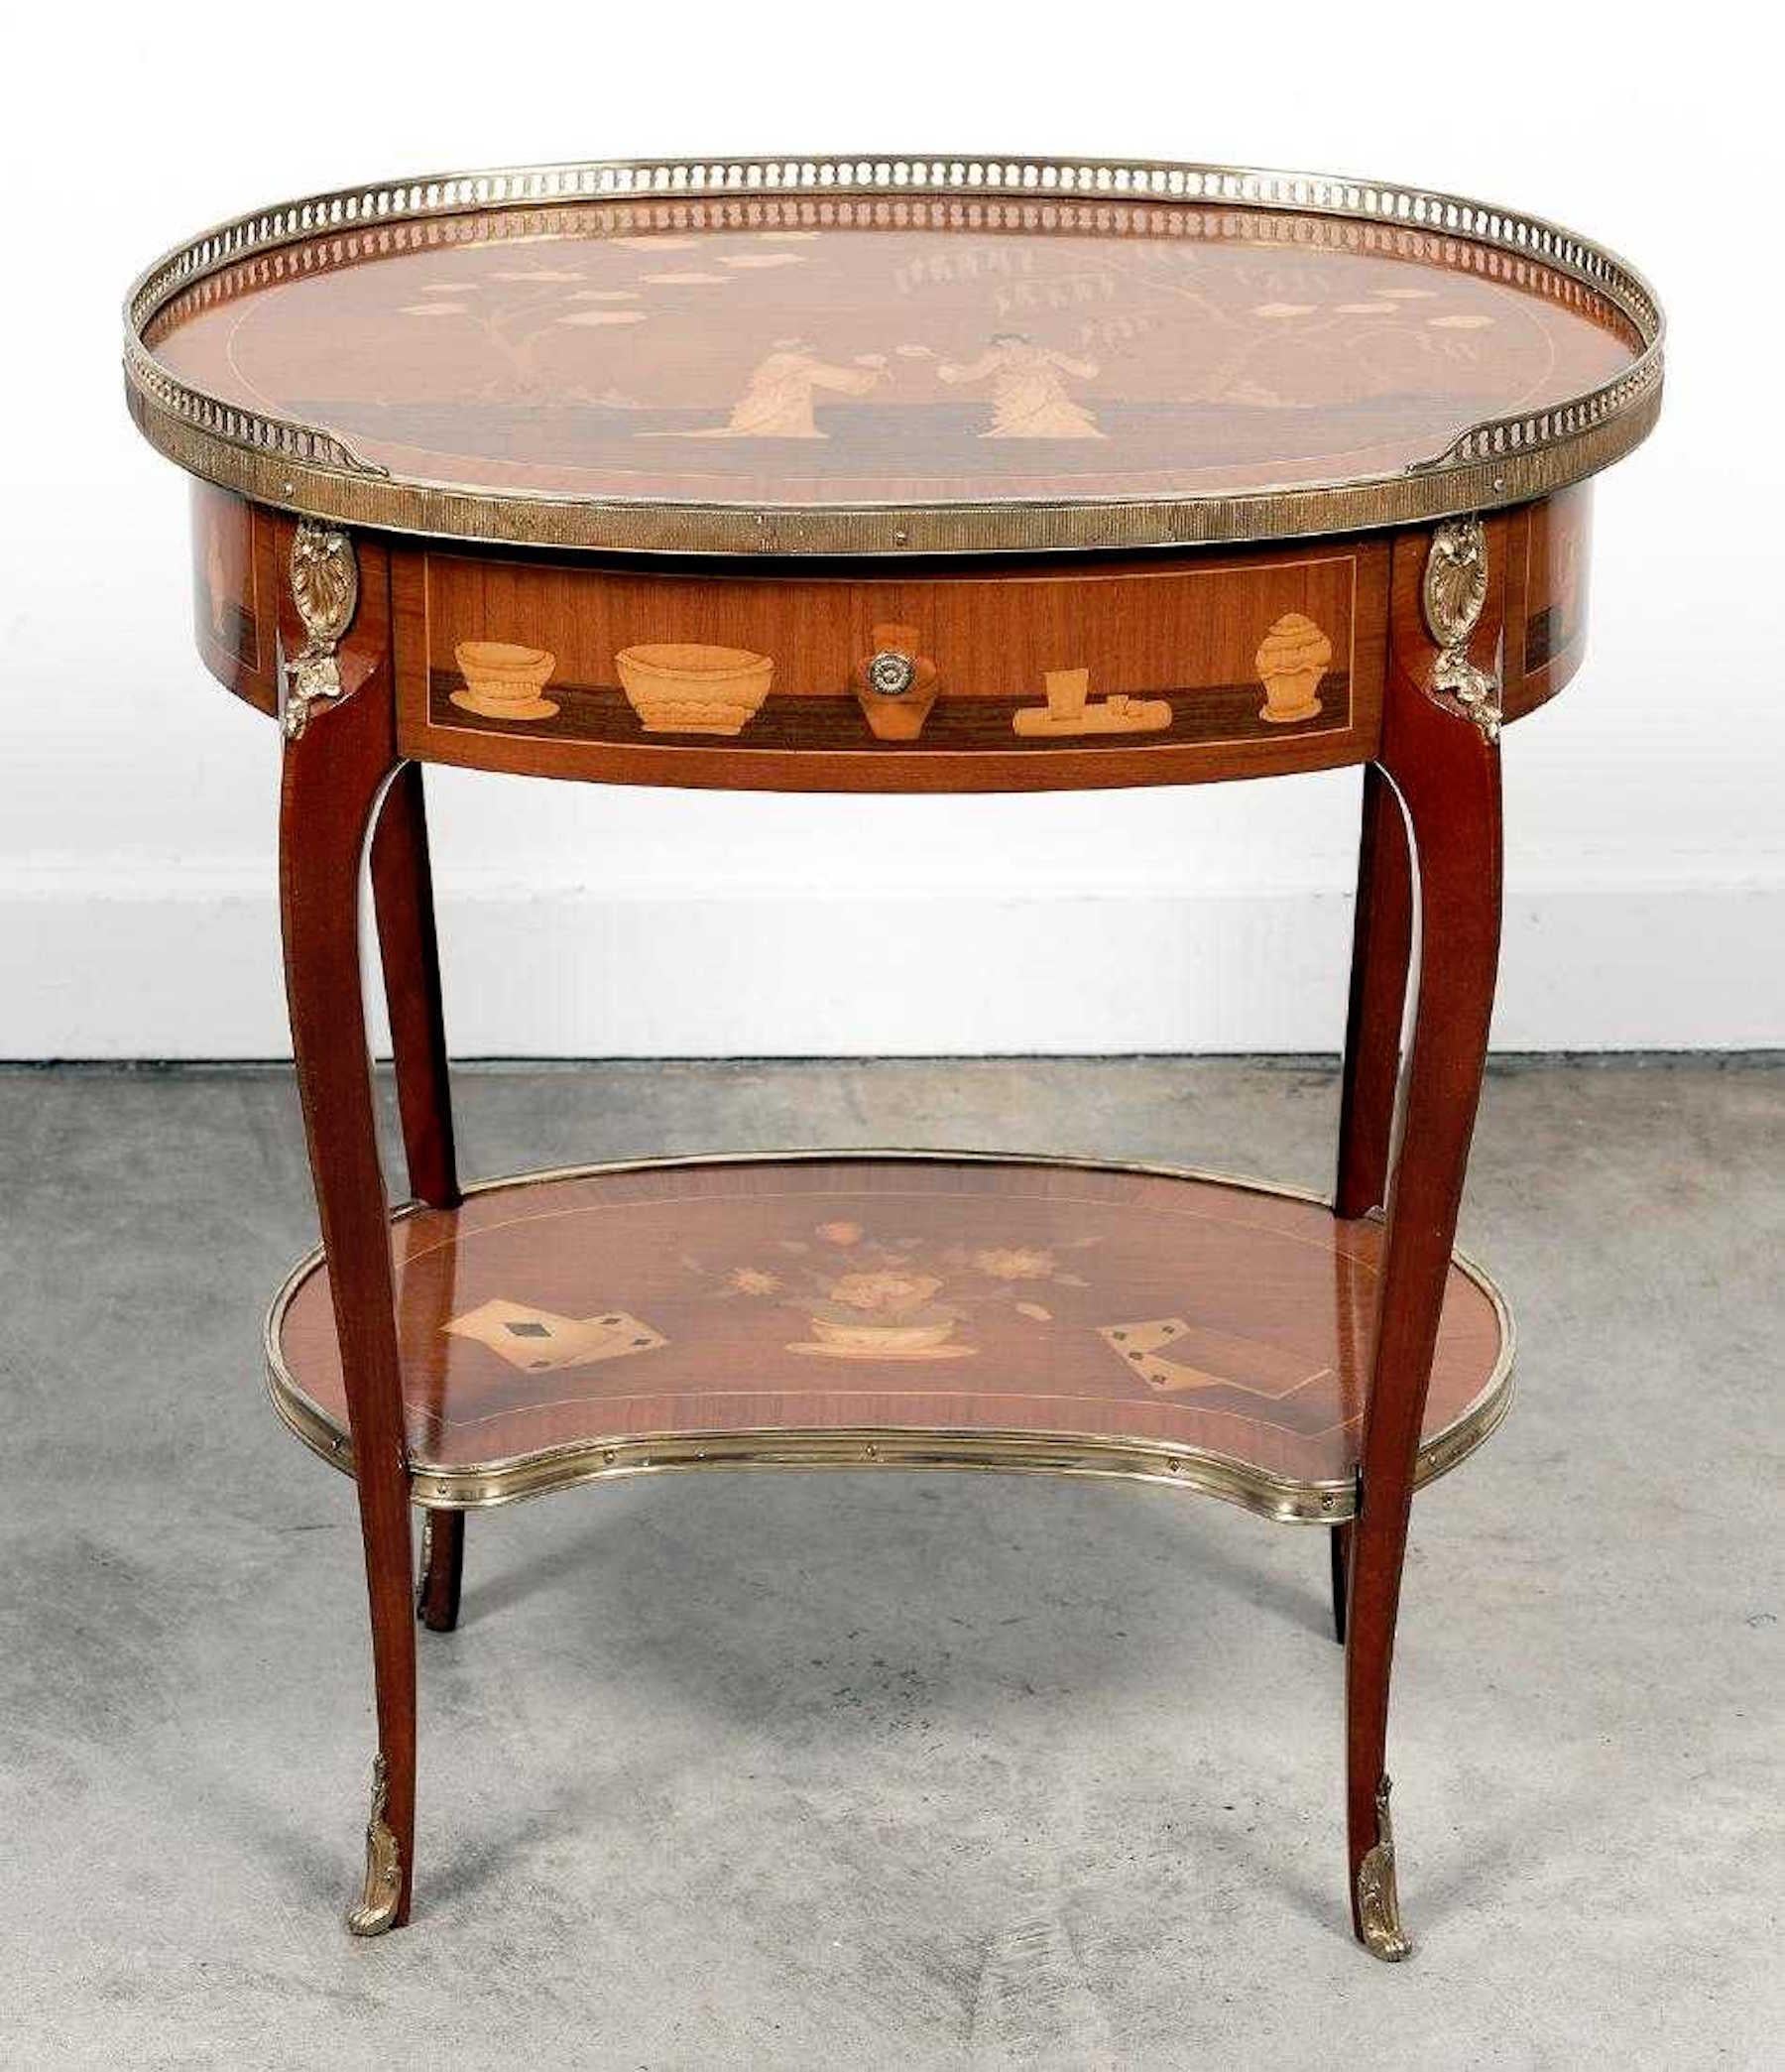 Louis XVI style king and tulip wood marquetry side table, with oval top, bronze gallery and chinoiserie exotic woods marquetry, fitted with one drawer.
Measures: Larger 26